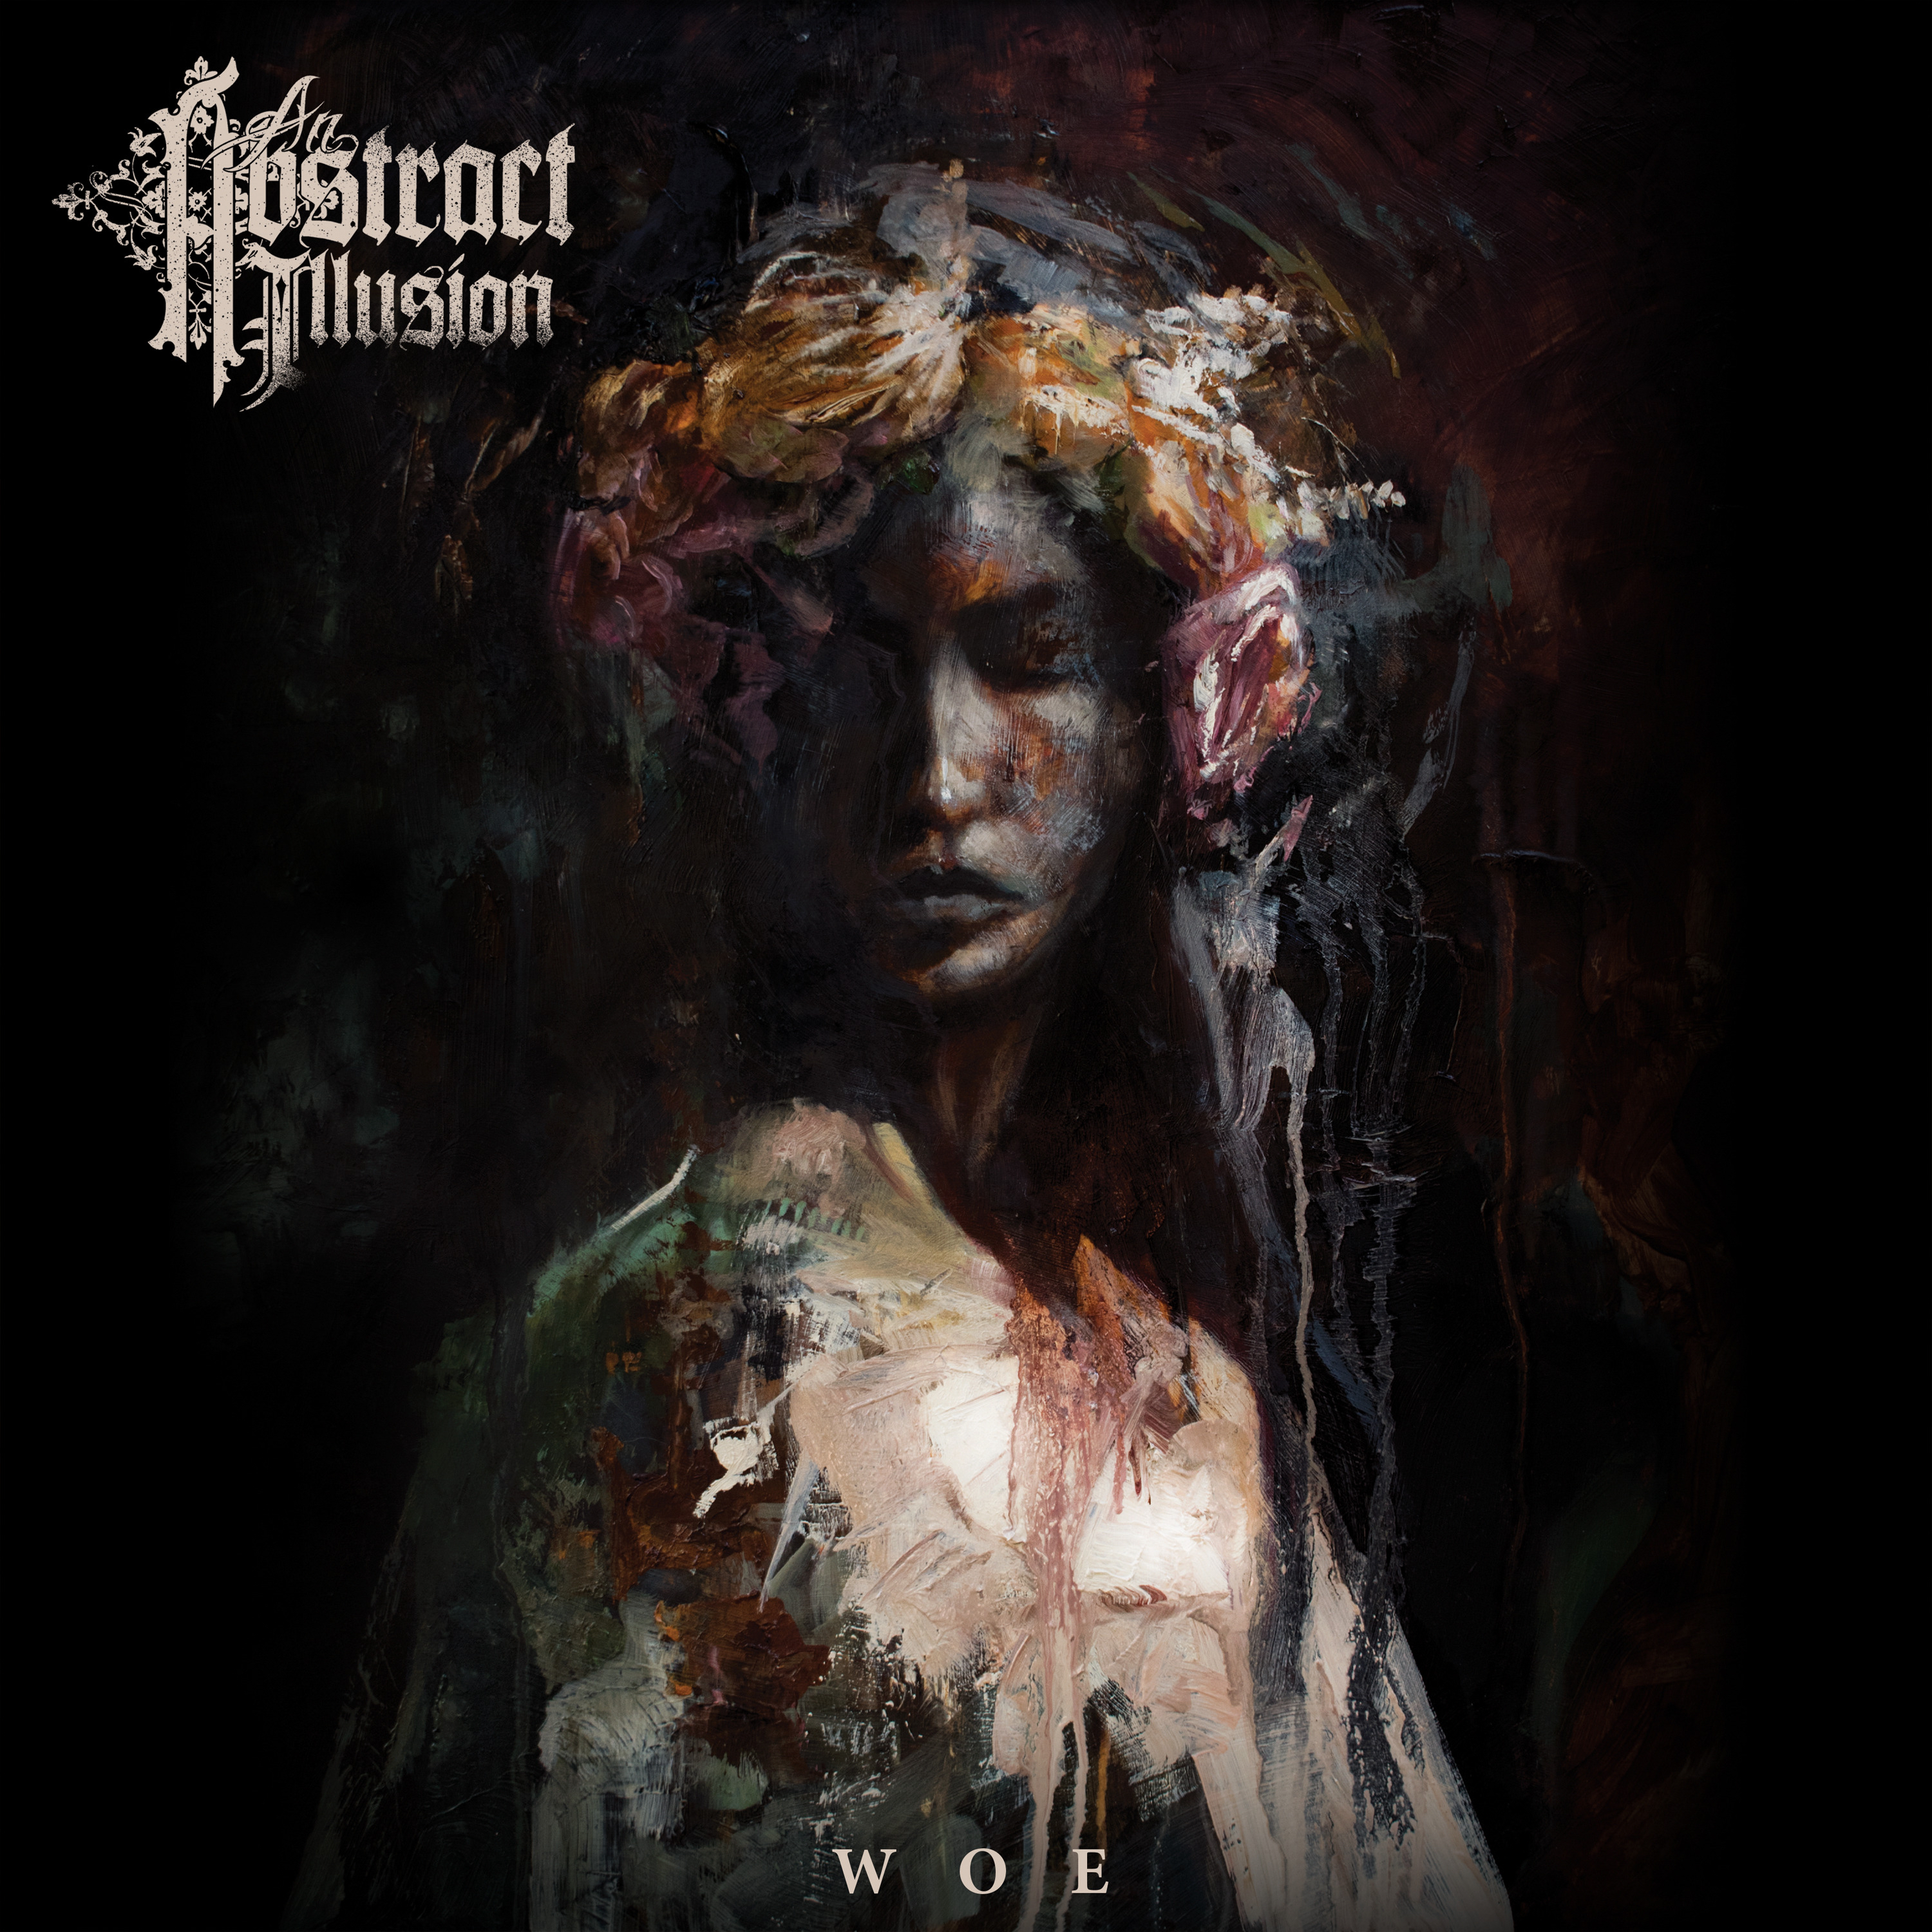 An Abstract Illusion – Woe (2022) (ALBUM ZIP)